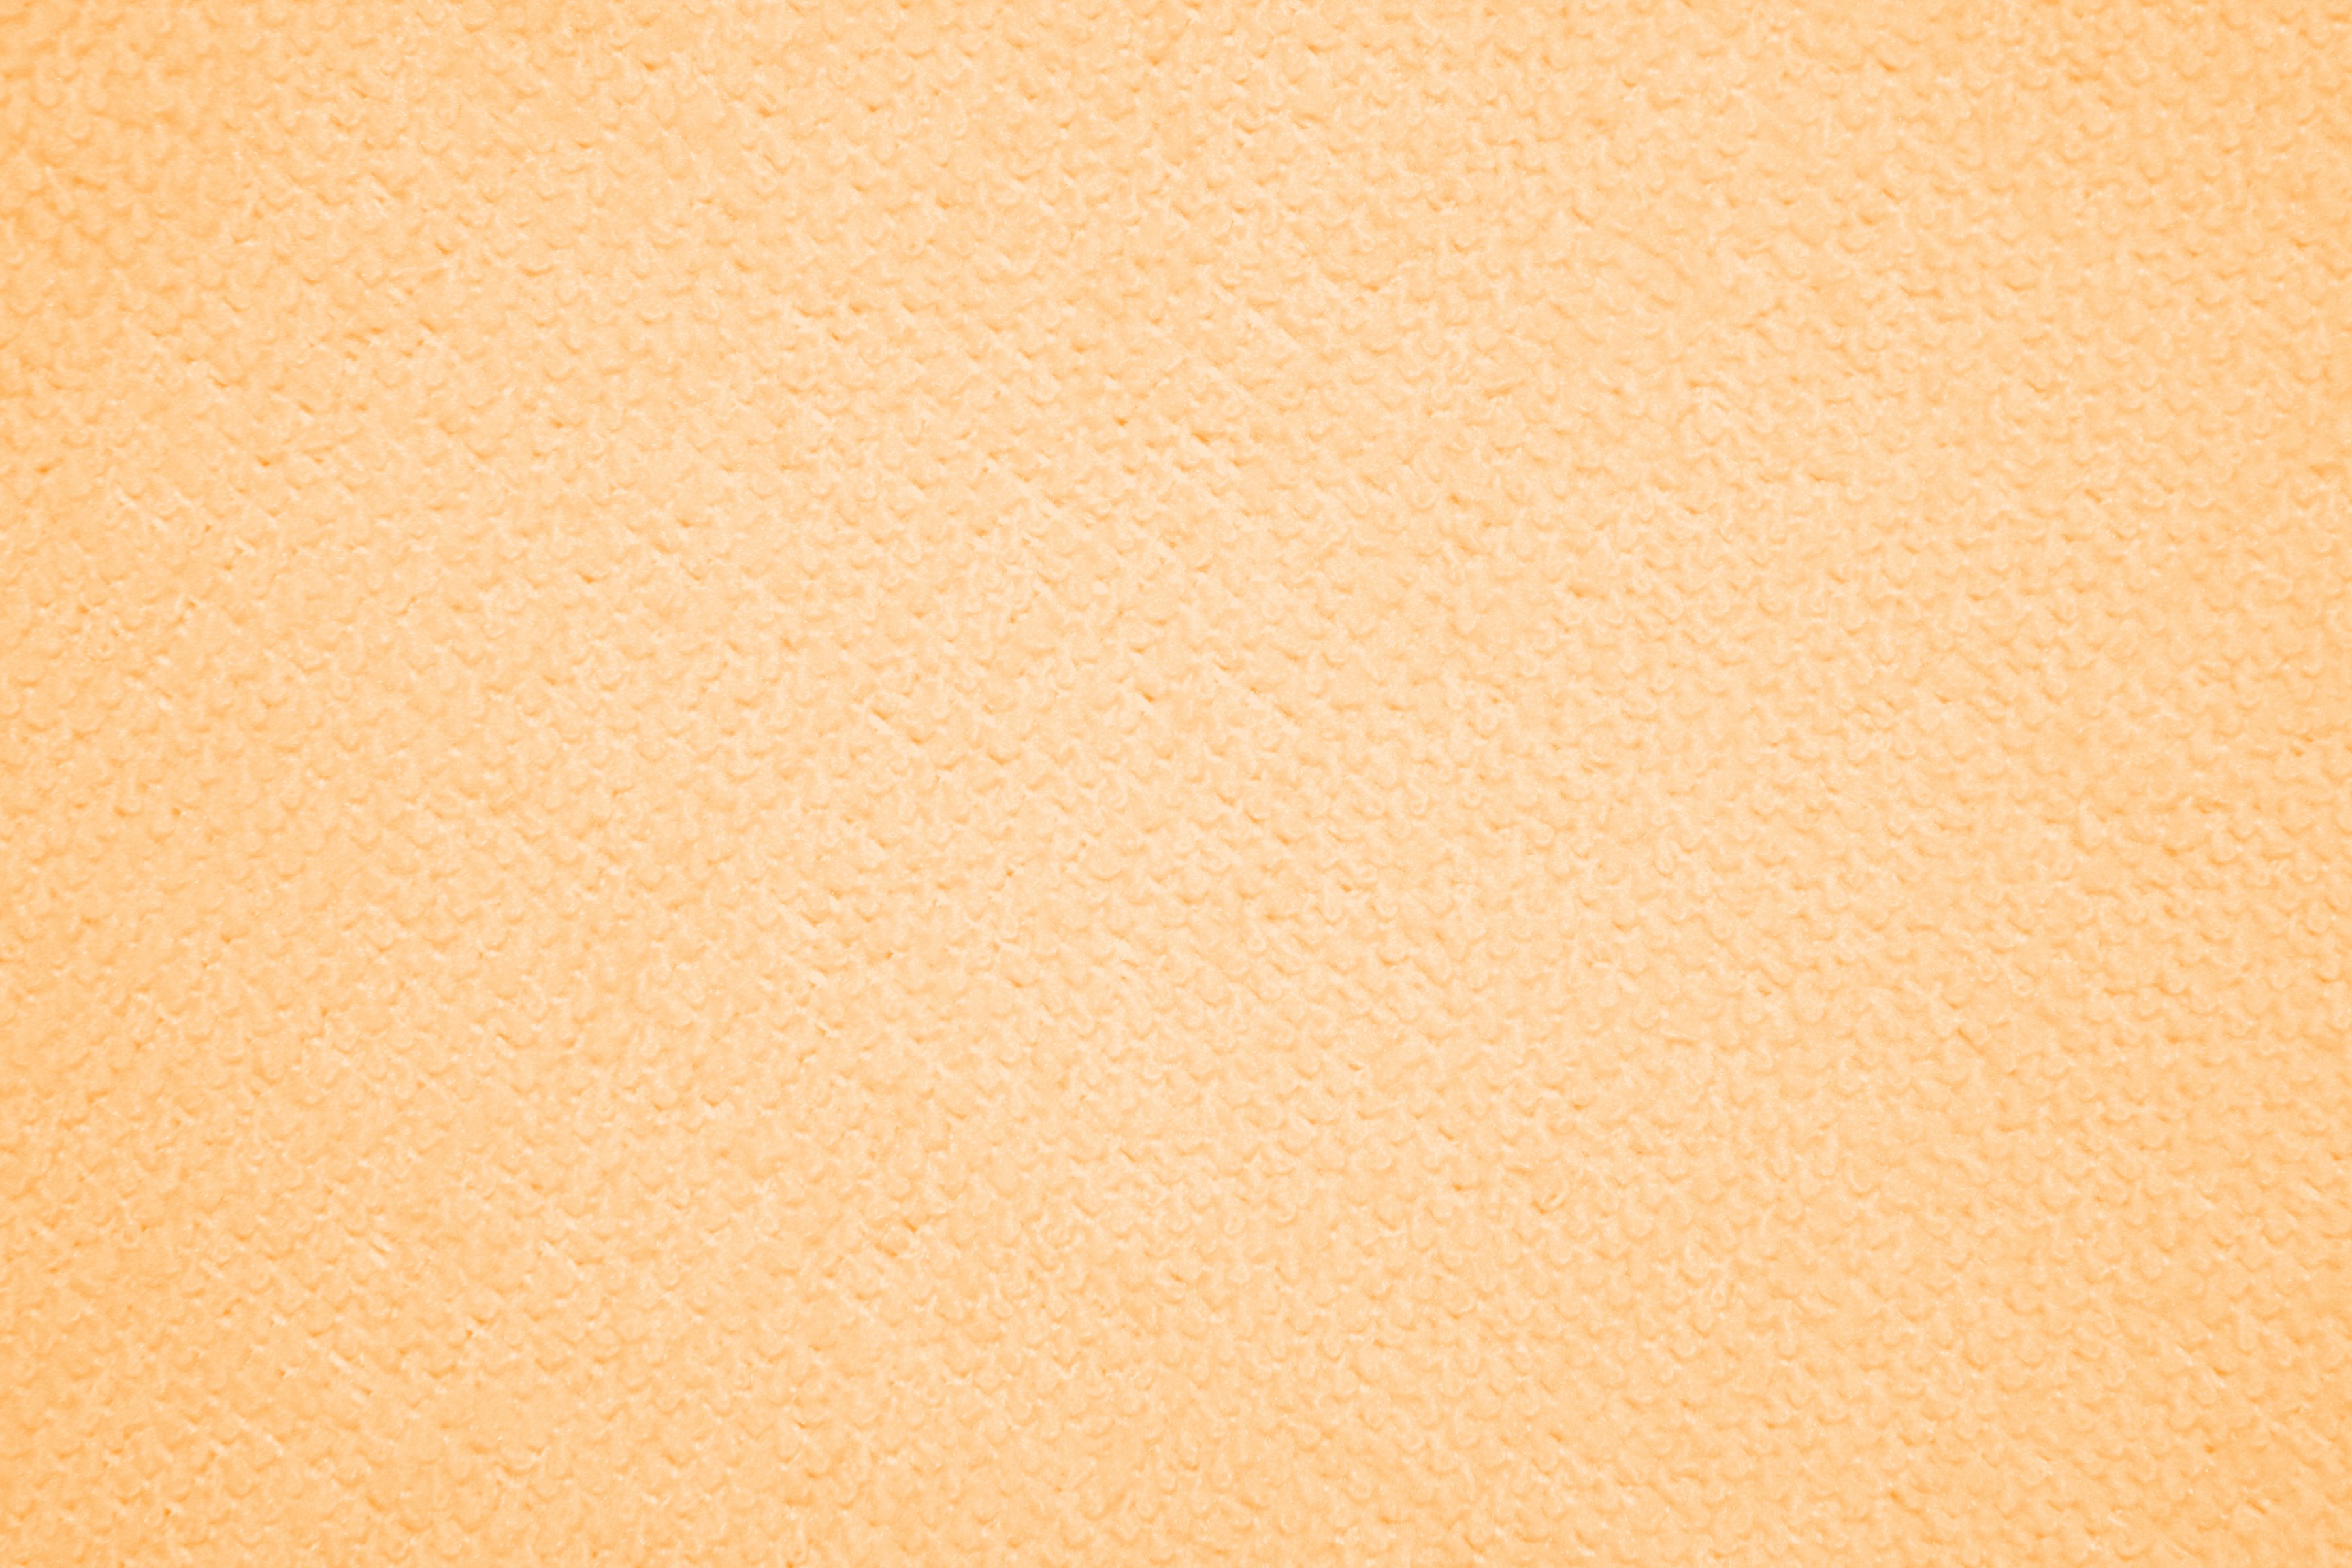 Free download Peach or Light Orange Microfiber Cloth Fabric Texture Picture  Free [3600x2400] for your Desktop, Mobile & Tablet | Explore 46+ Peach  Colored Wallpaper | Princess Peach Wallpaper, Colored Backgrounds, Colored  Smoke Wallpaper